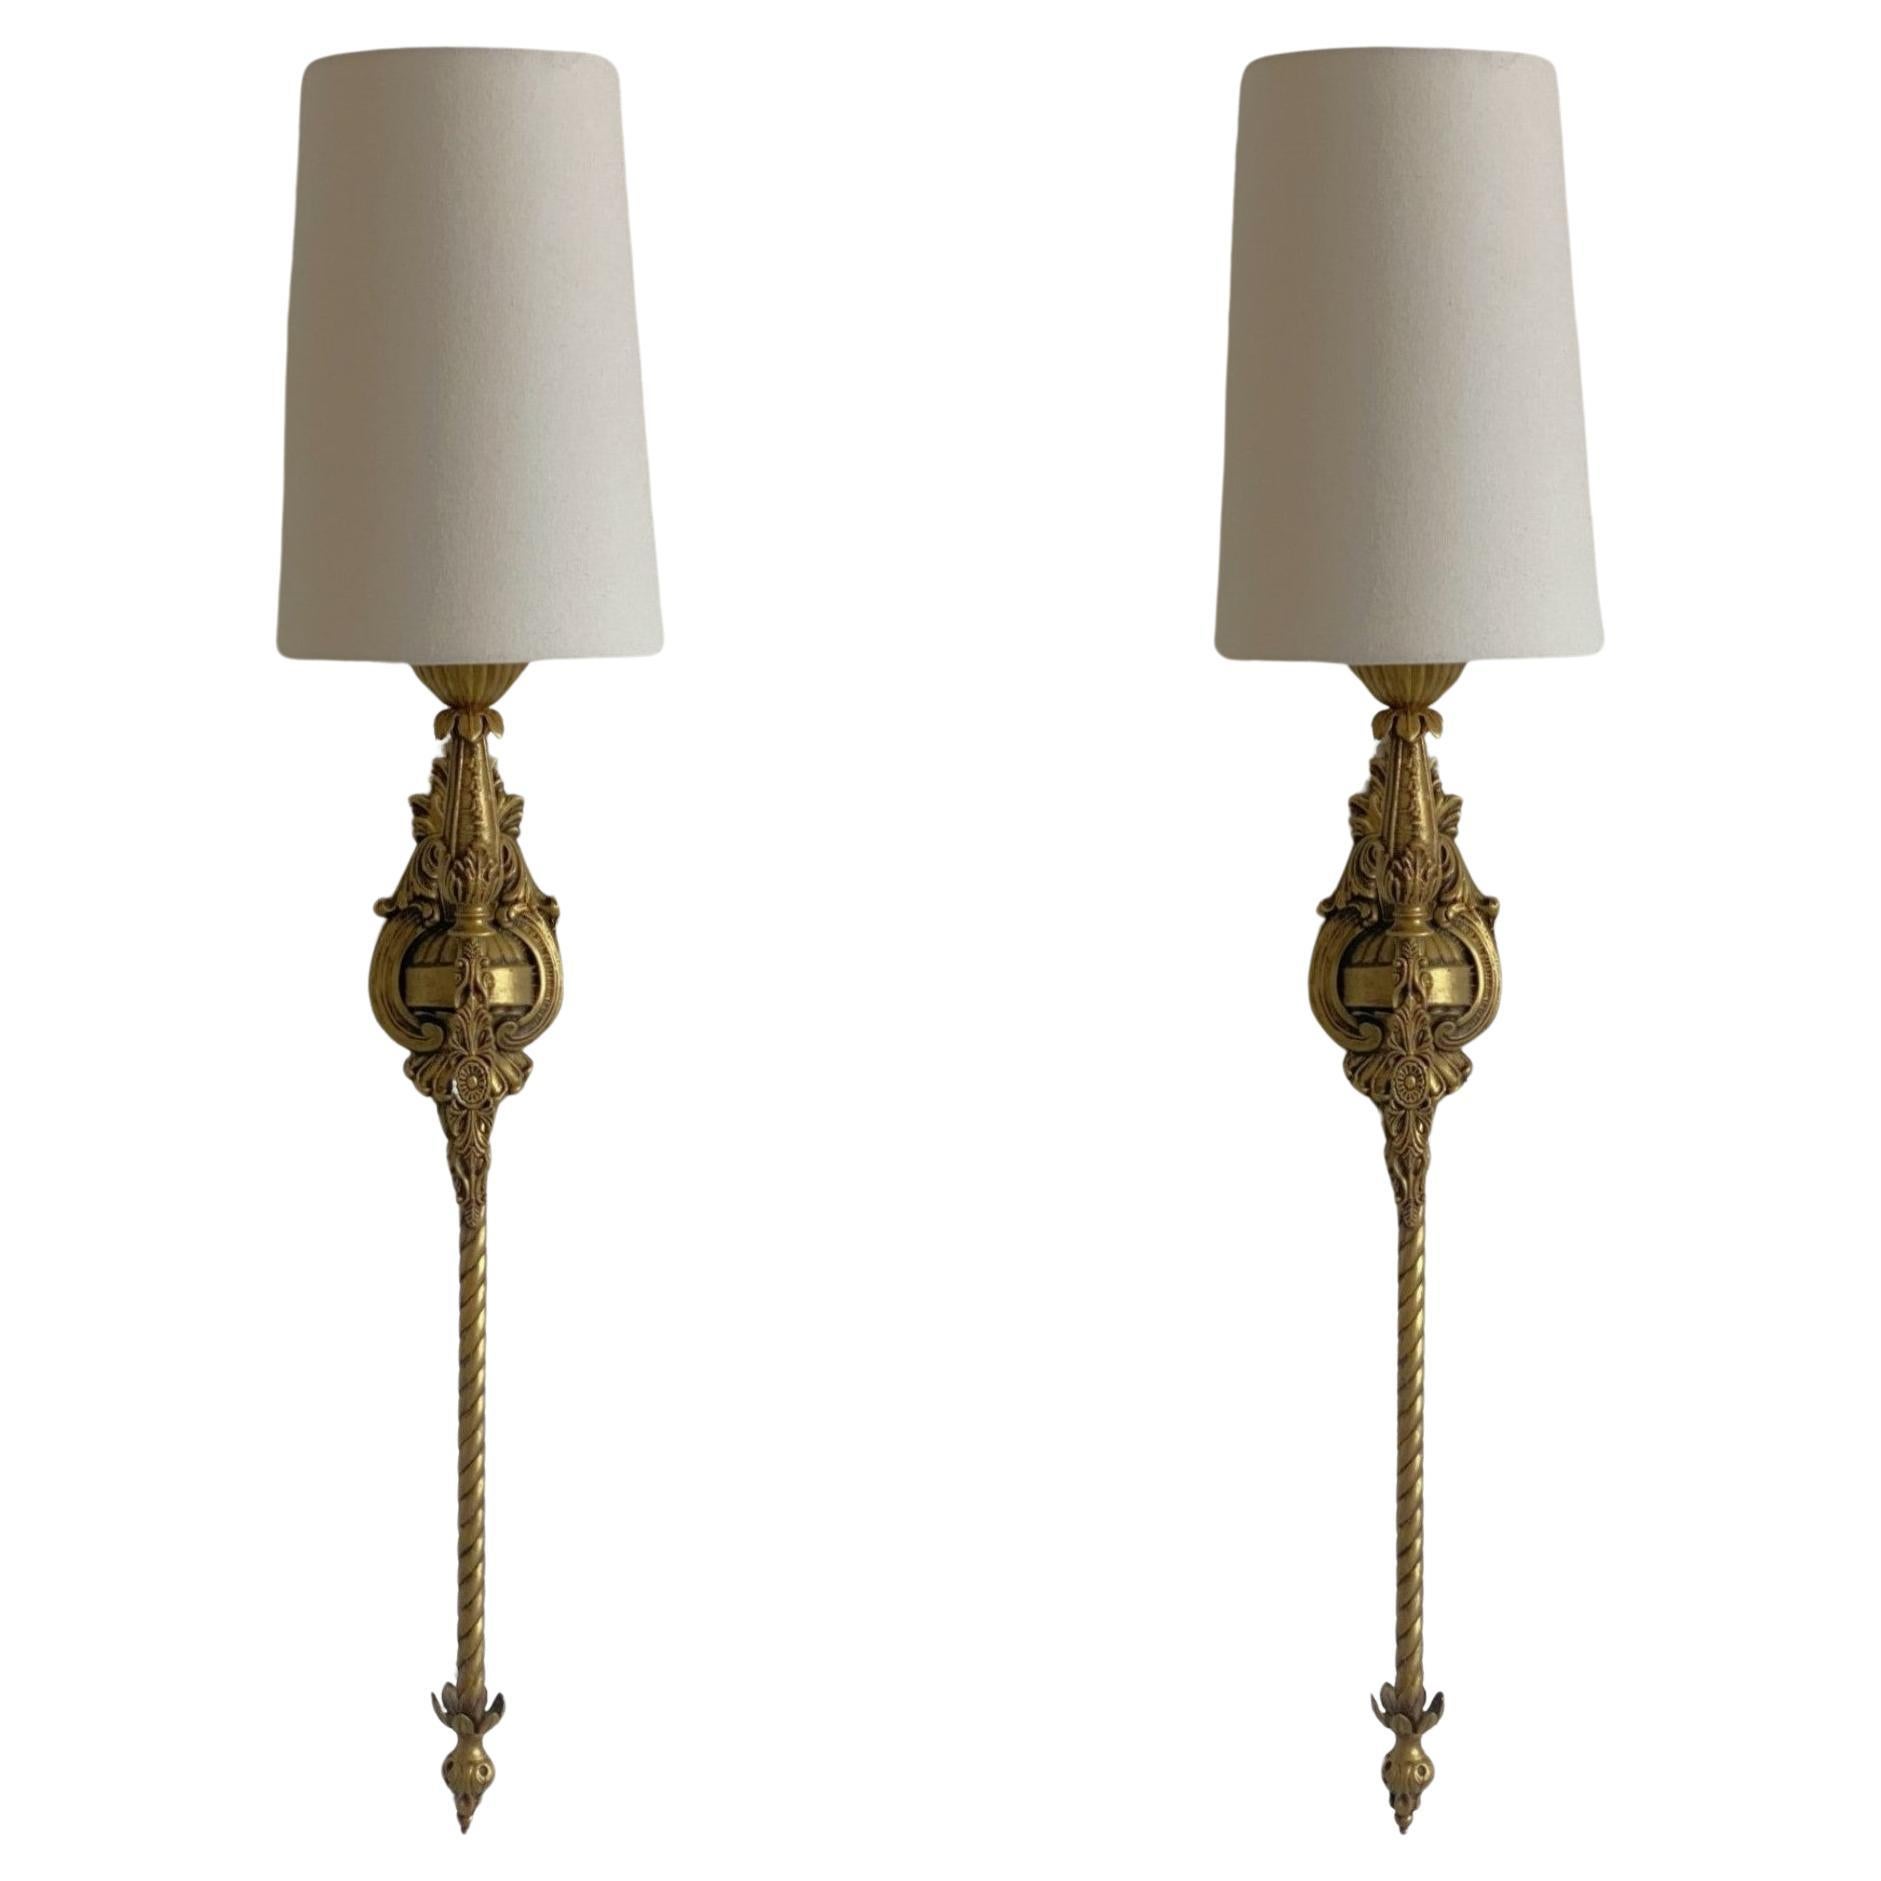 Pair of French Tall Art Deco Bronze Torchiere Wall Sconces, 1930s For Sale